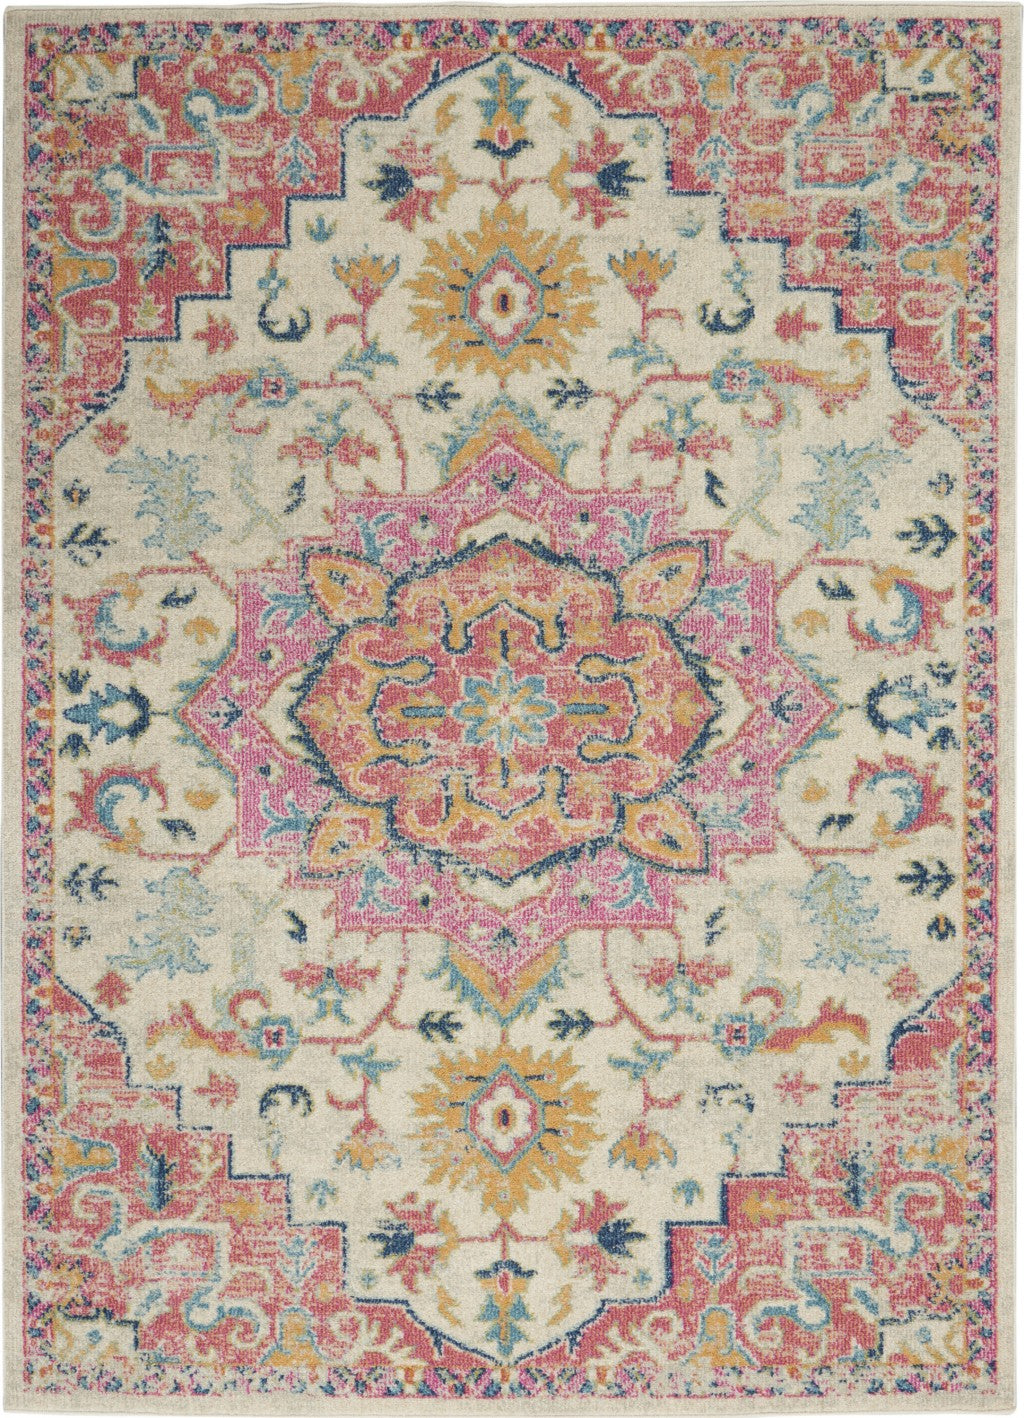 4’ x 6’ Ivory and Pink Medallion Area Rug